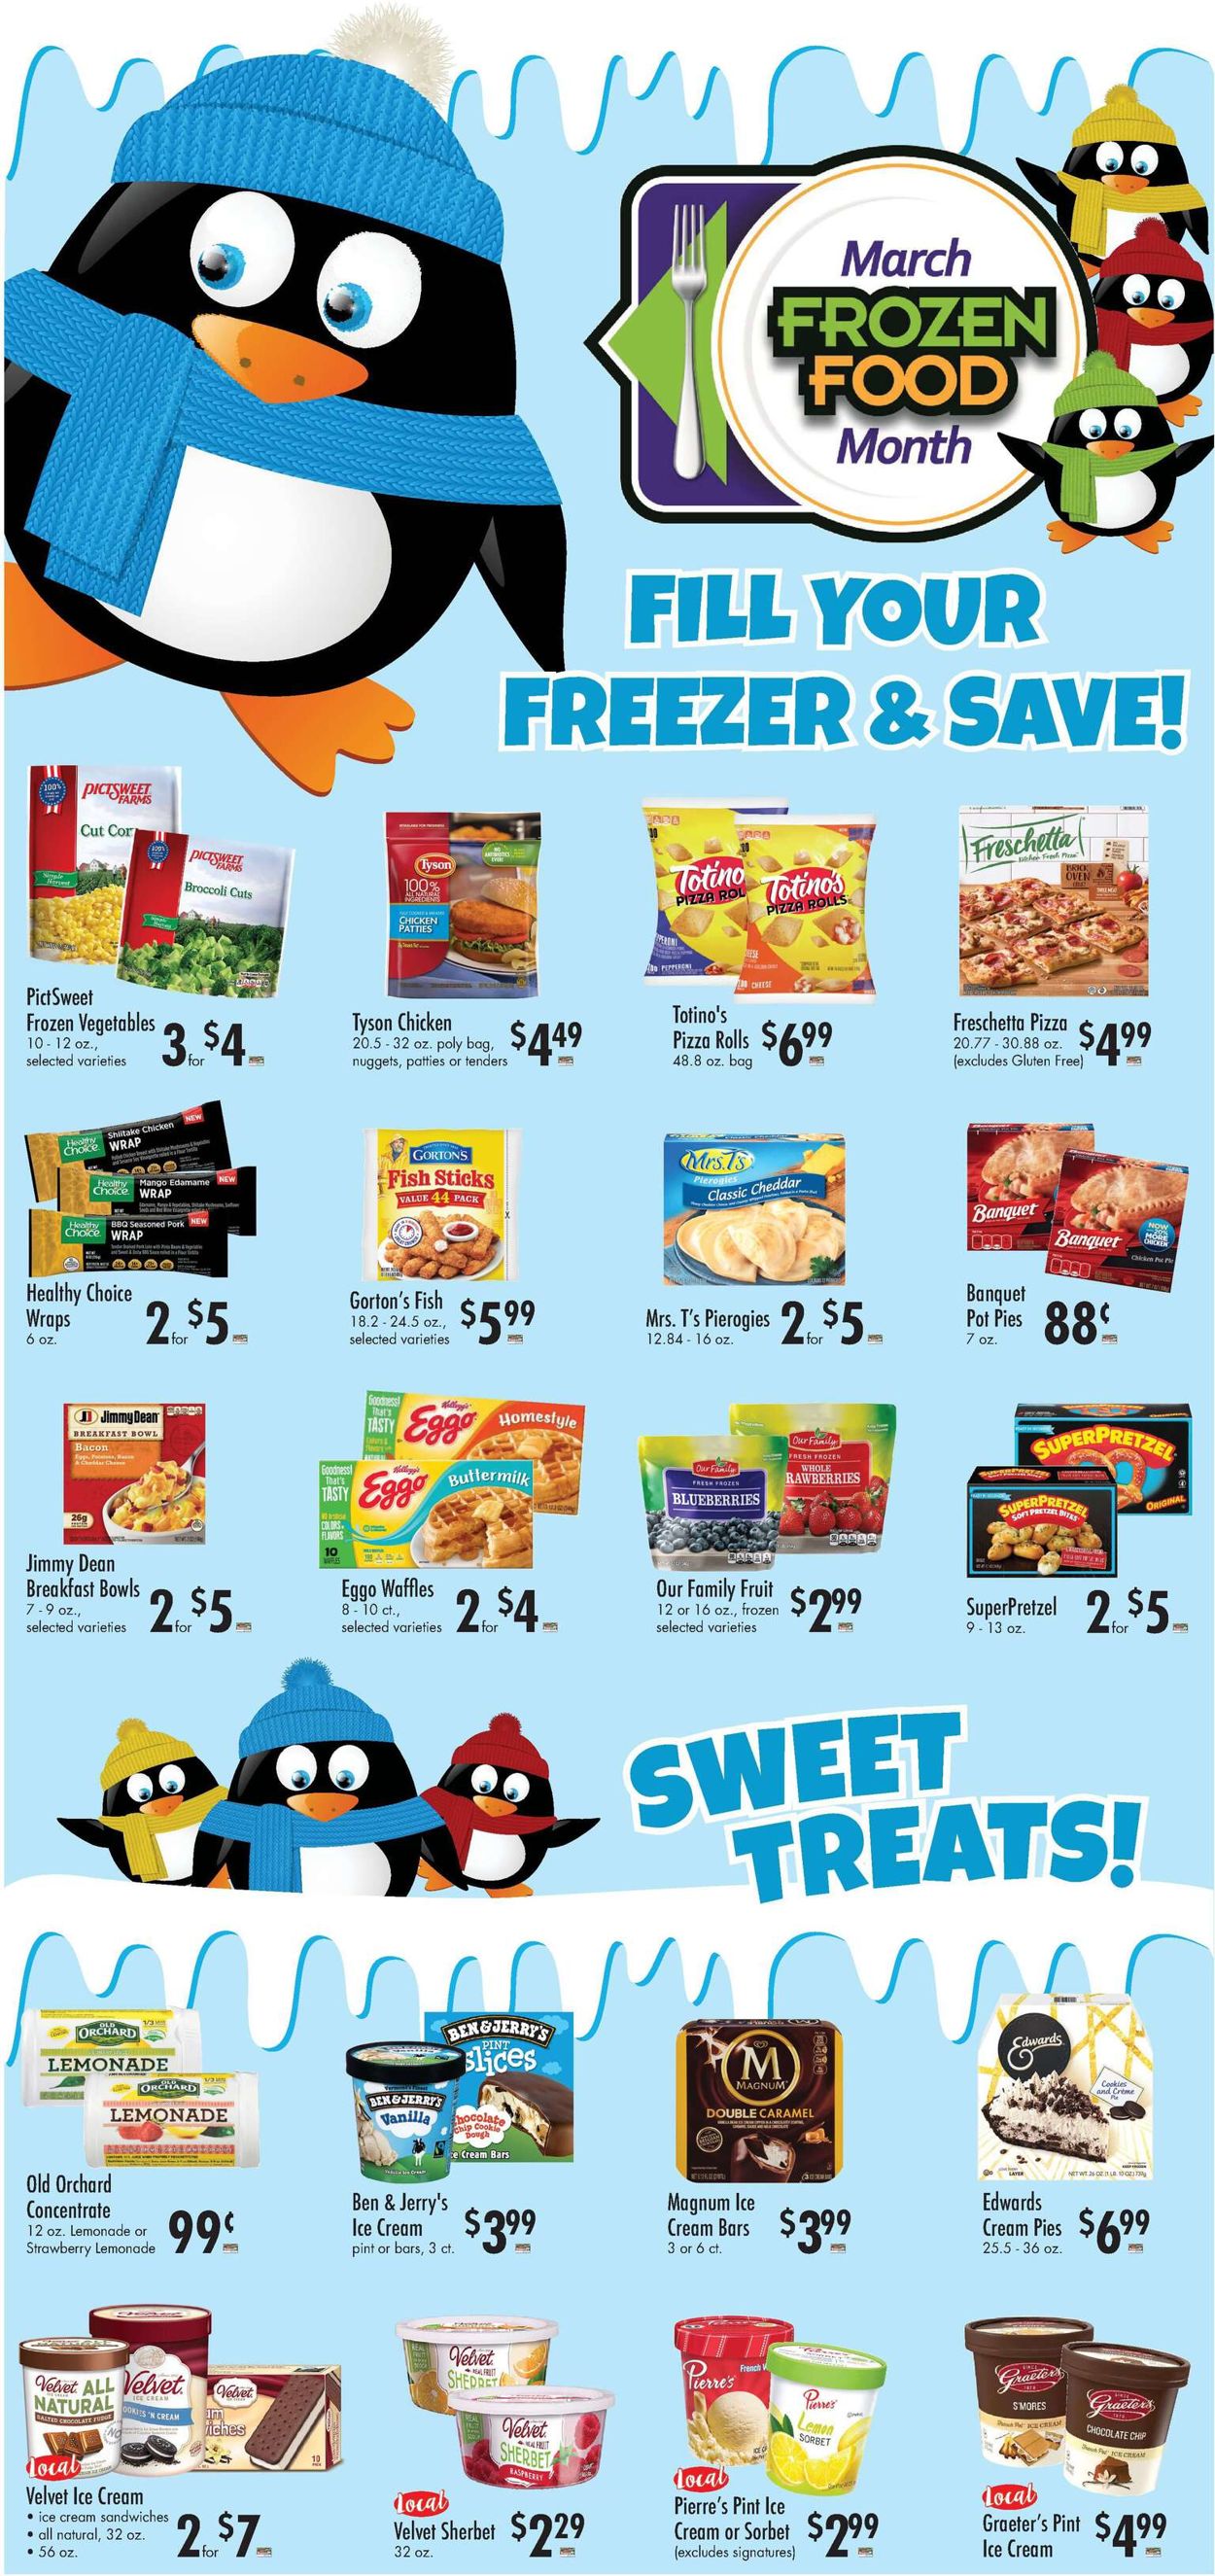 Buehler's Fresh Foods Ad from 03/03/2021